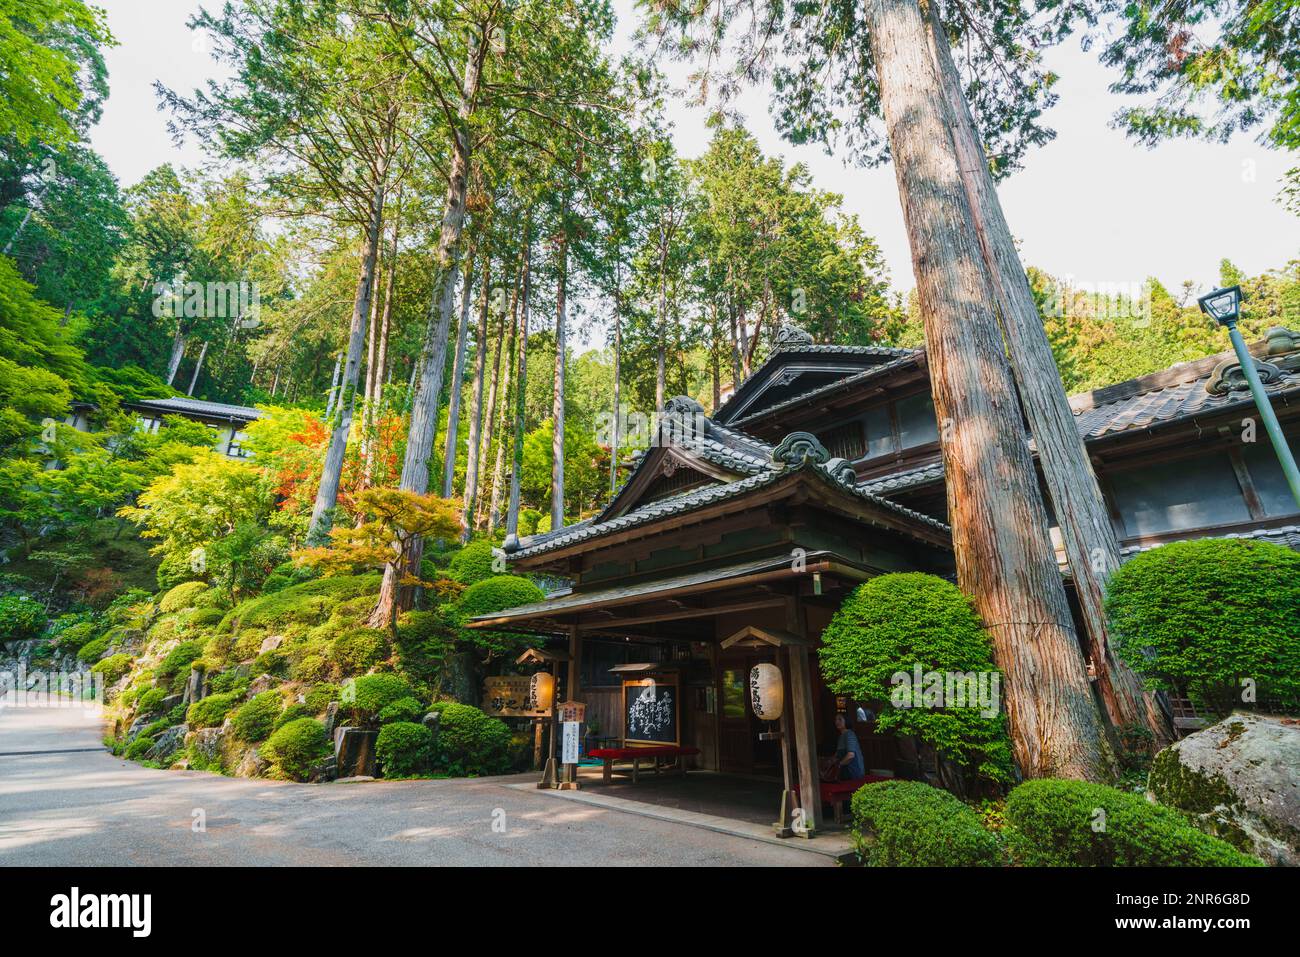 Yunoshimakan, a traditional ryokan inn located in the mountains above Gero Onsen. The 3-story wooden building dates back to 1931. Stock Photo